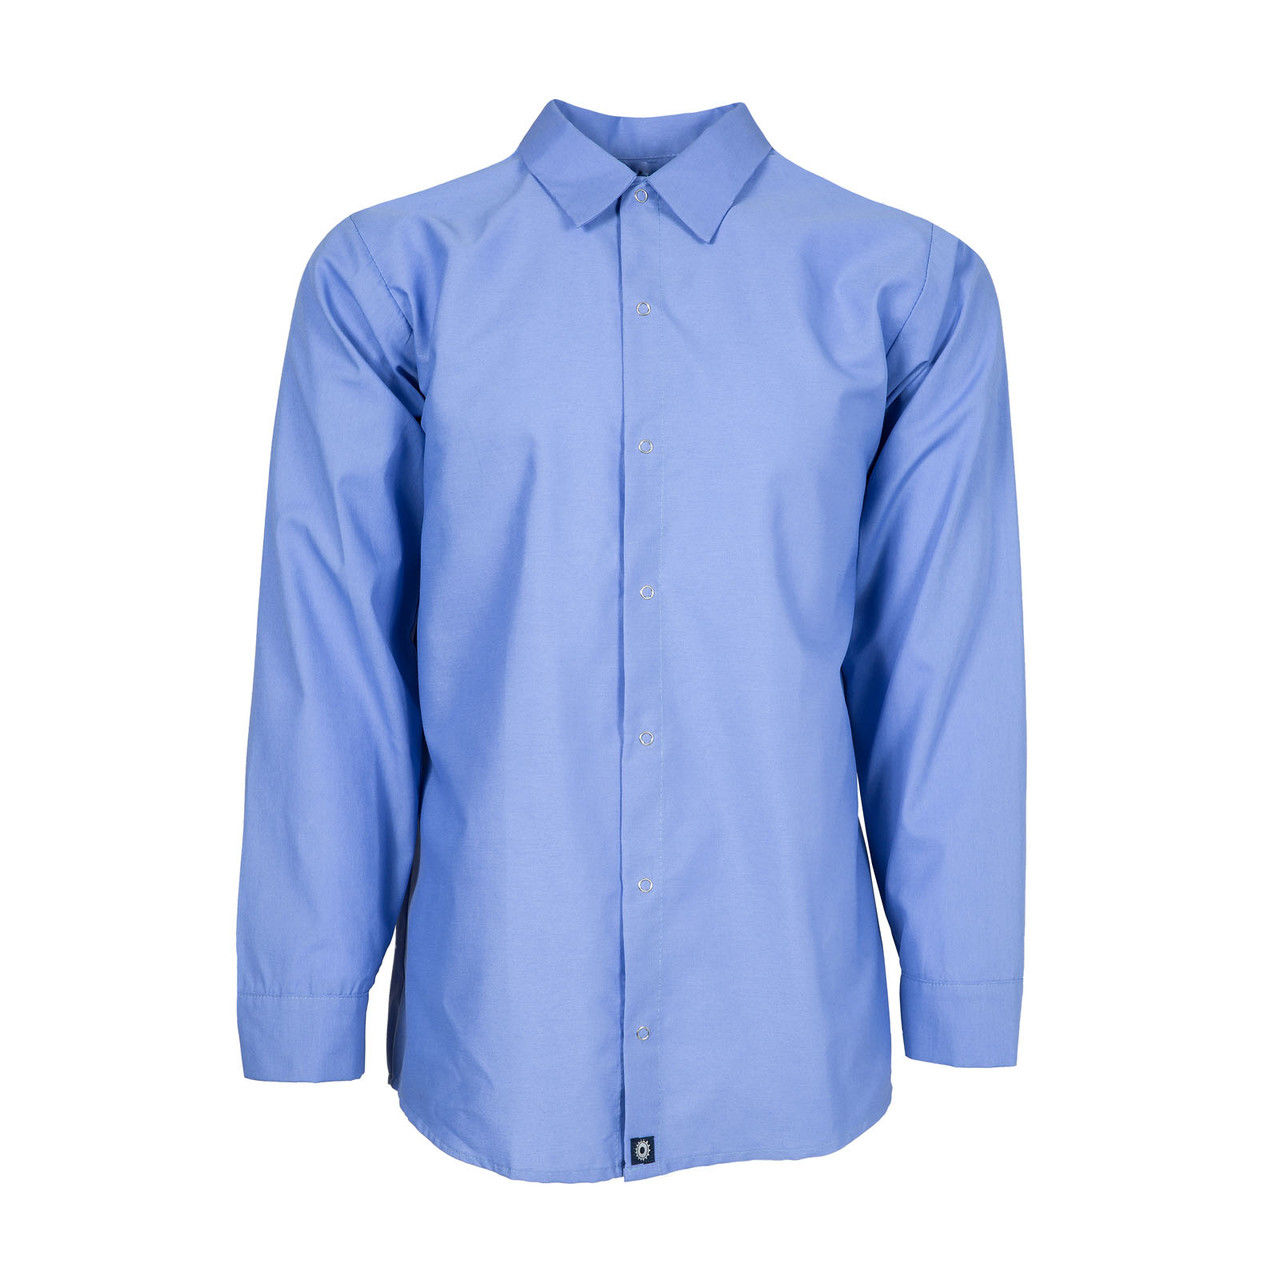 What size range is available for the blue work shirt womens in Gulf Blue?